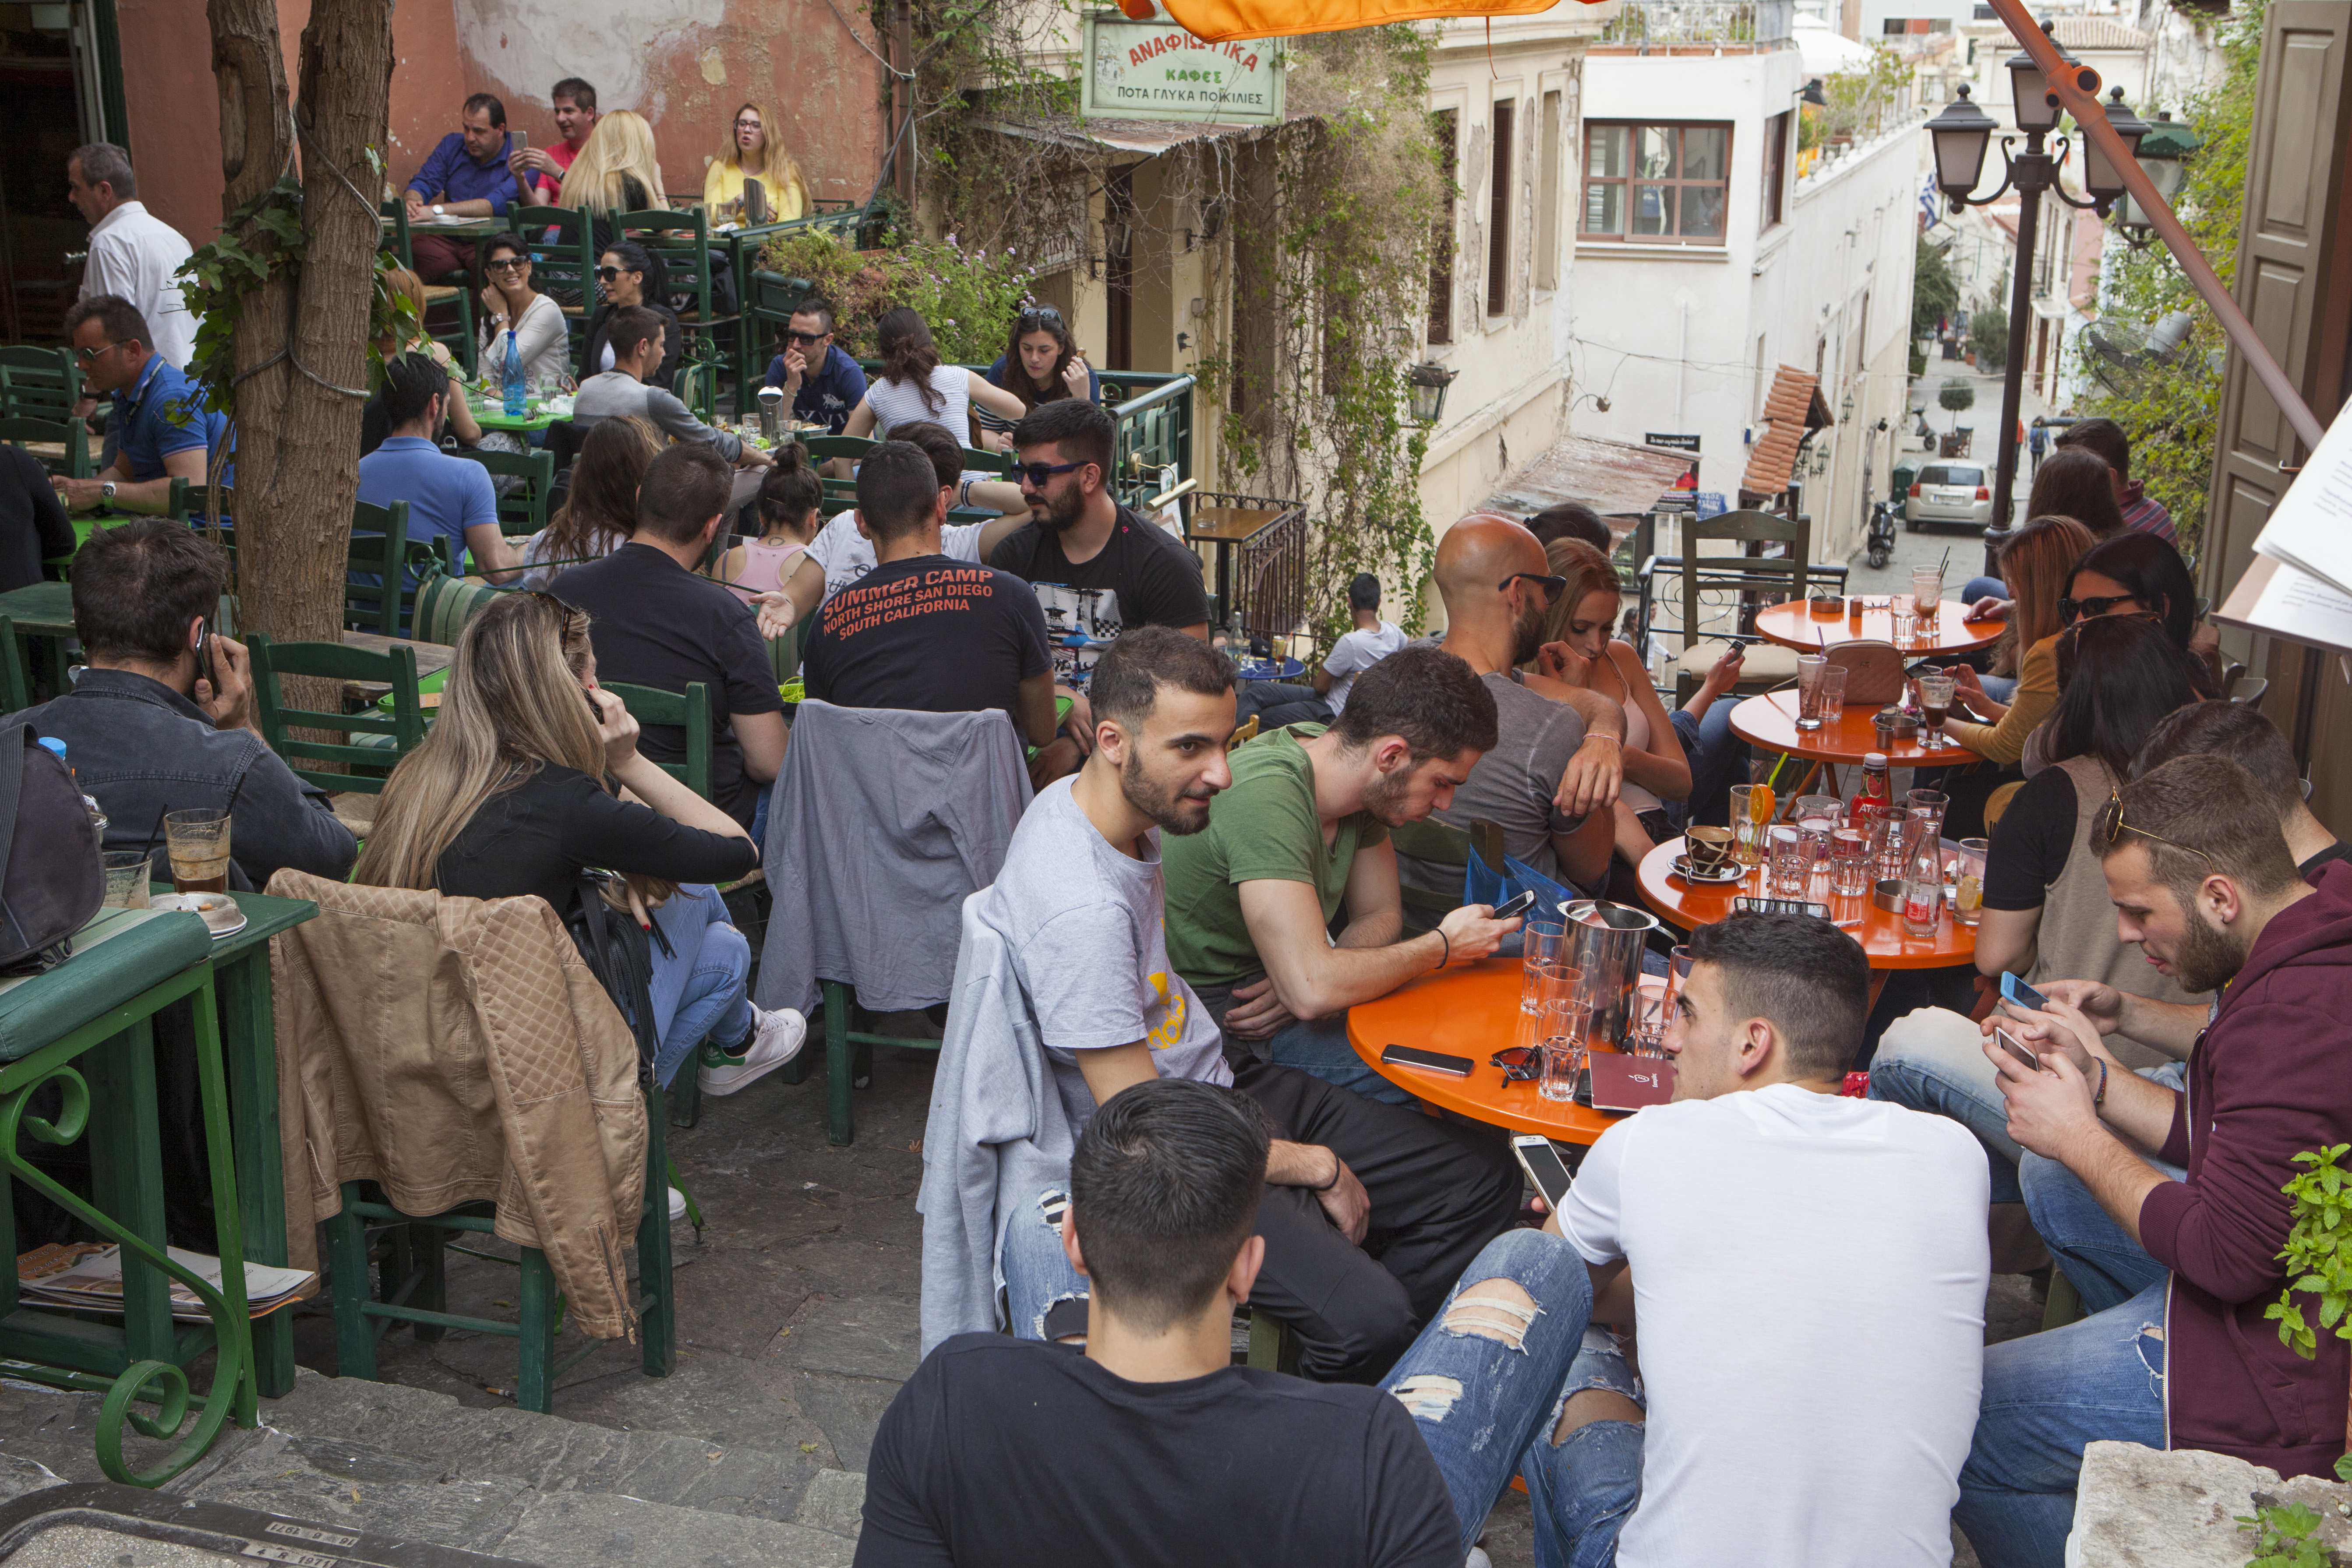 ATHENS, GREECE - APRIL 7: People enjoy an outdoor cafe in the Plaka neighborhood, on April 7, 2016 in Athens, Greece. As it recovers from the financial crisis, Athens is experiencing a cultural rebirth. This spring, the streets are filled with tourists. (Photo by Melanie Stetson Freeman/The Christian Science Monitor via Getty Images)